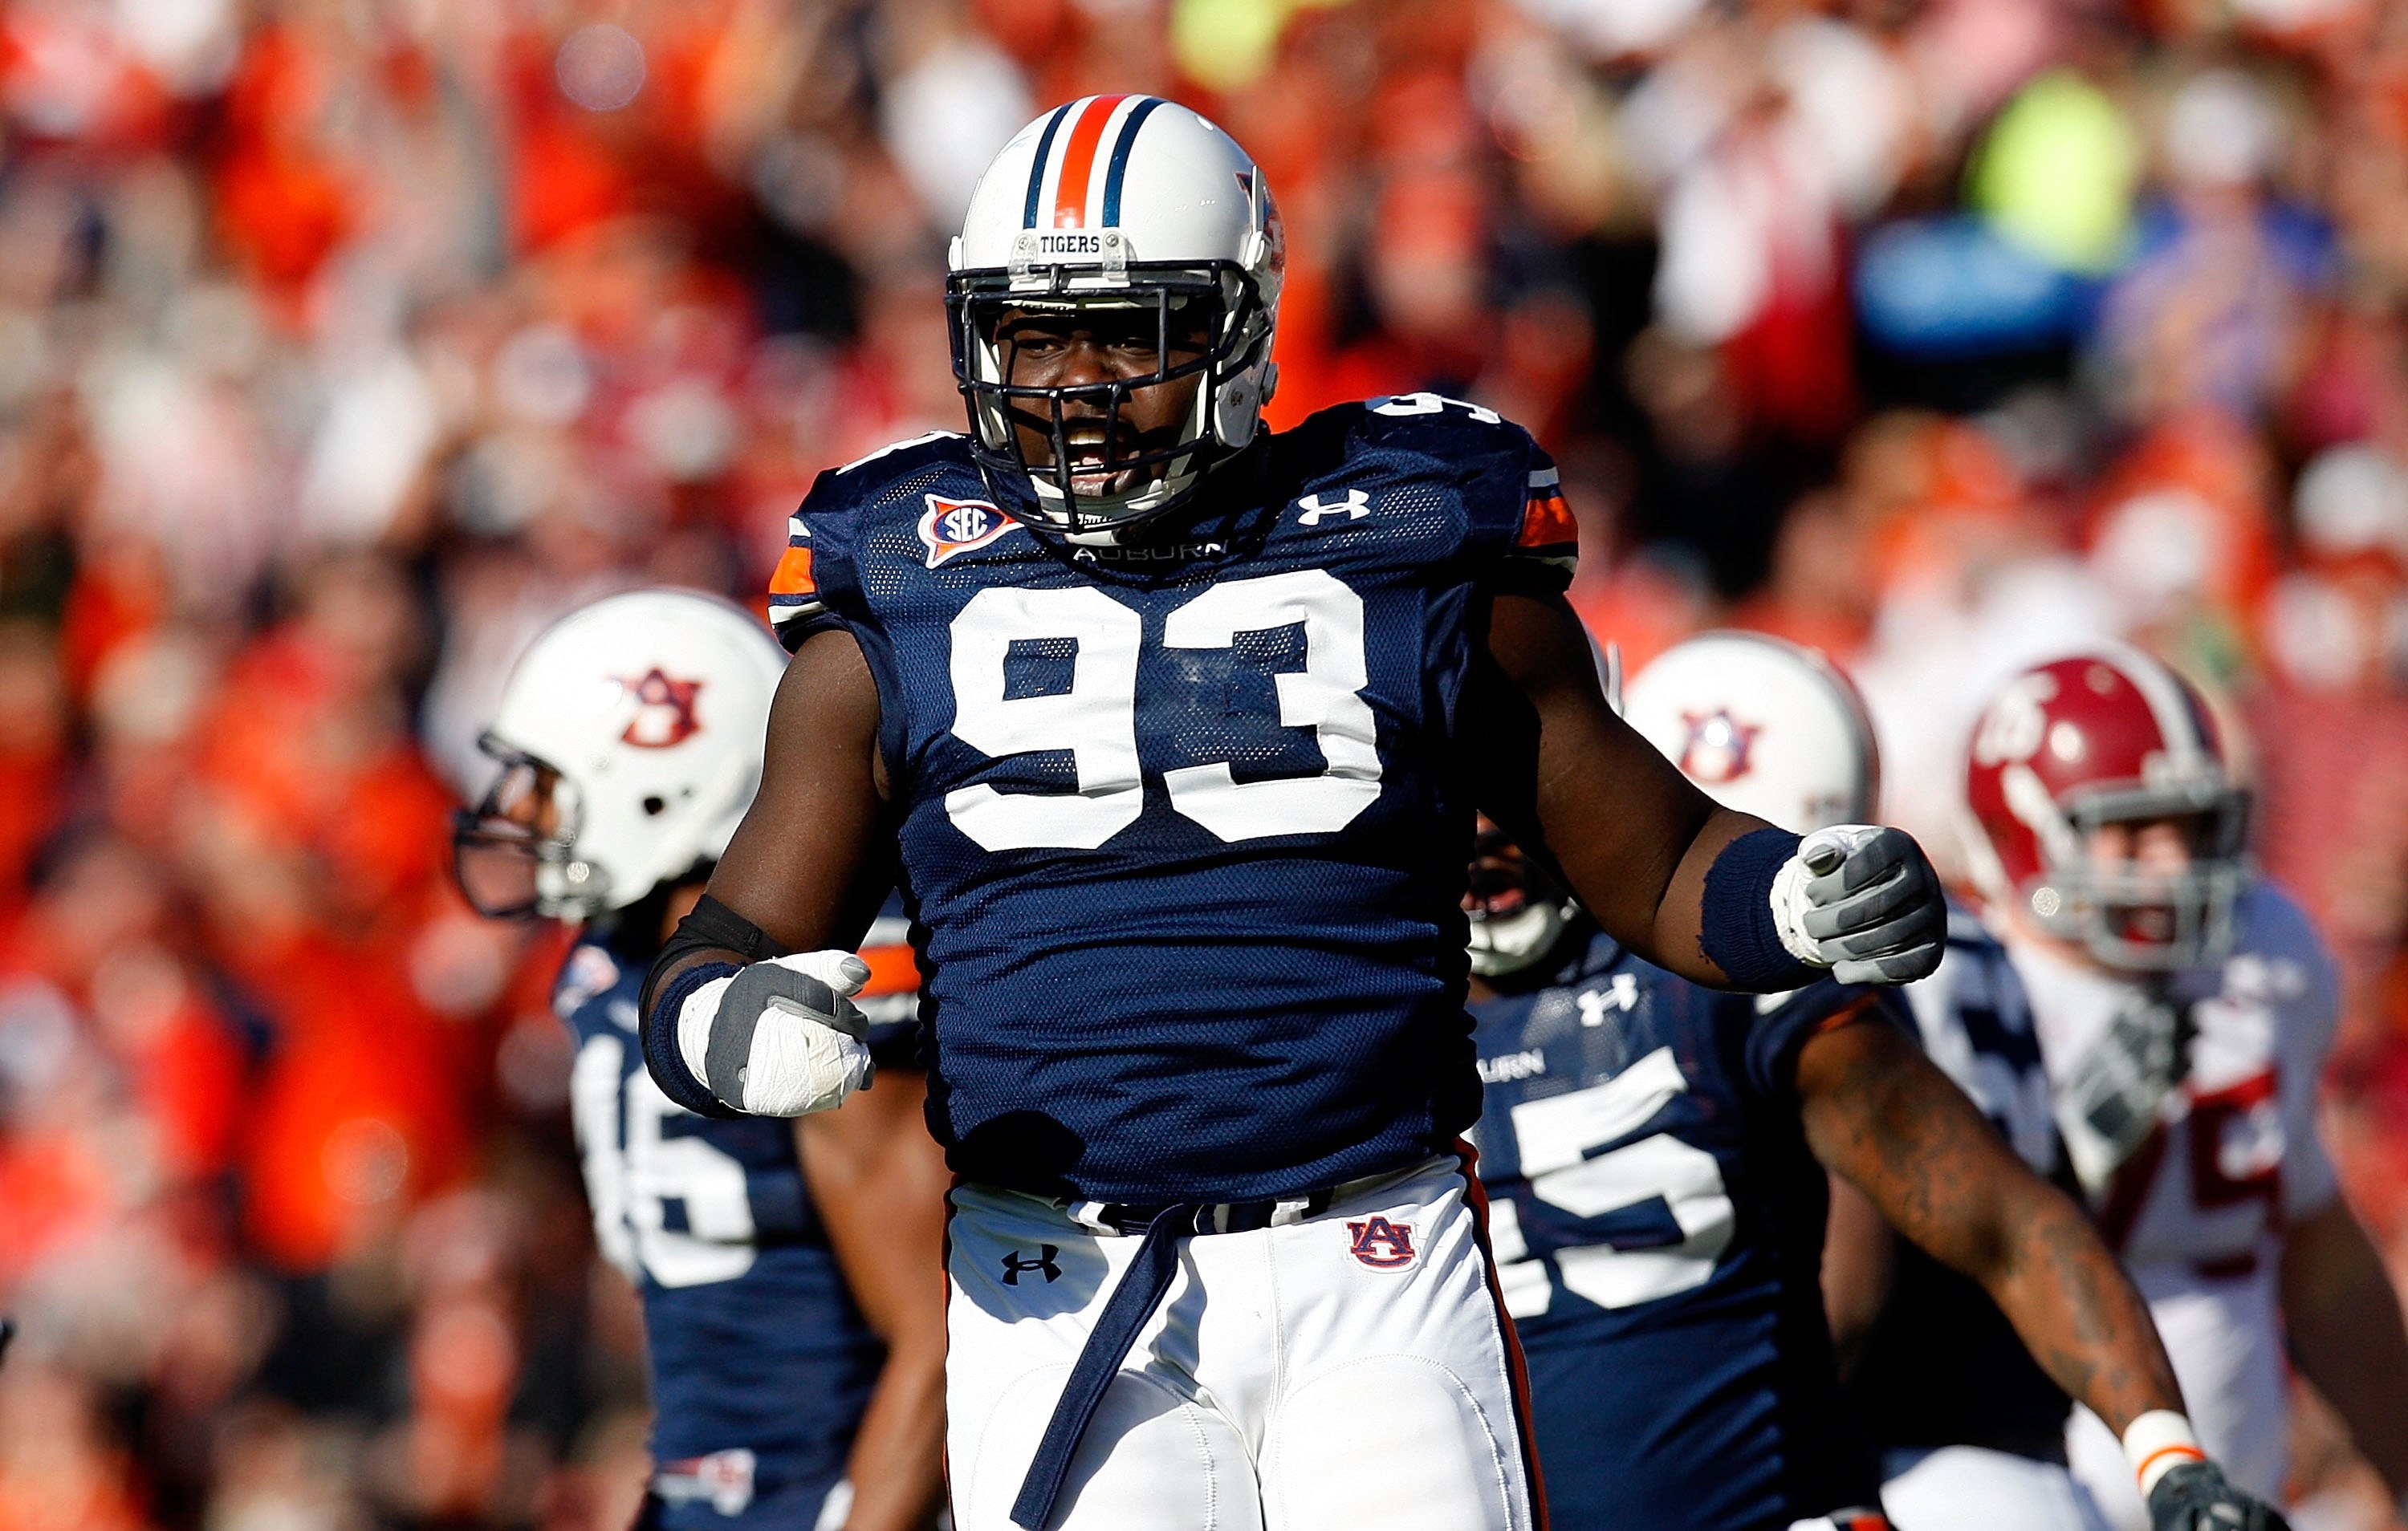 2011 NFL Draft The 6 Best Prospects for Auburn and Oregon in BCS